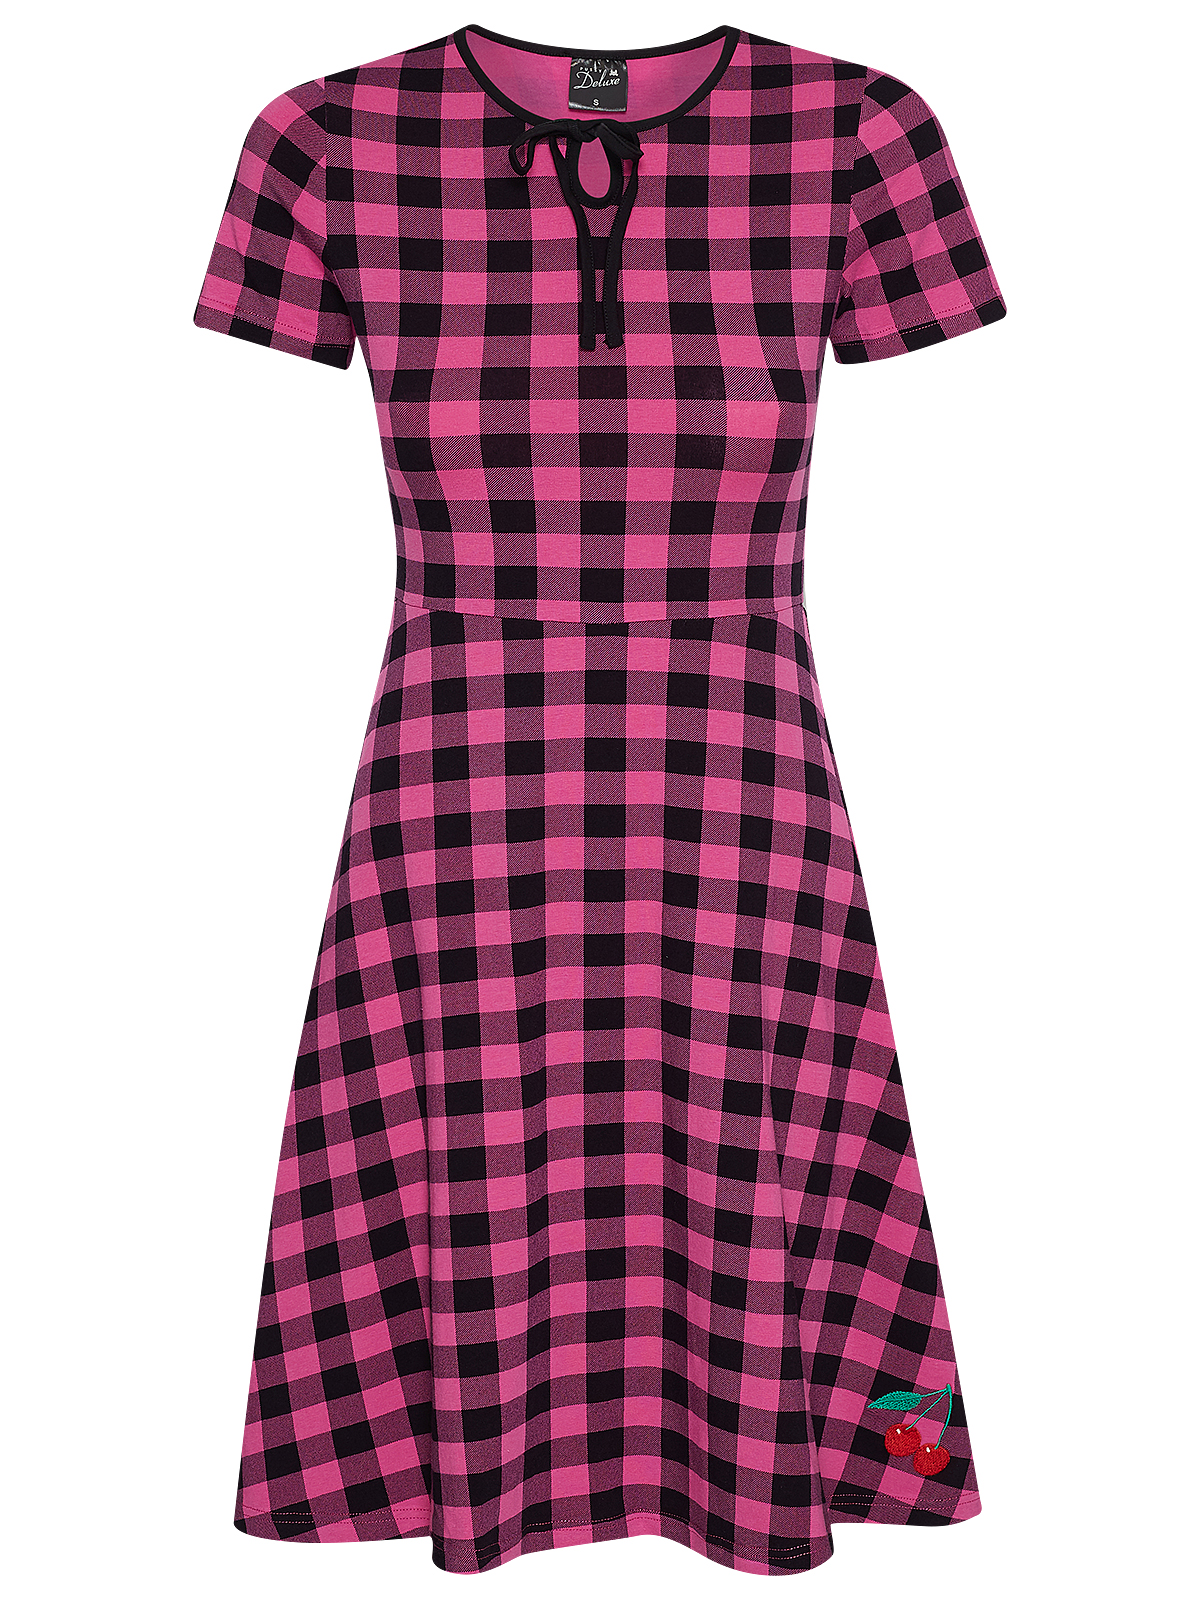 PUSSY DELUXE DAMEN A-LINIEN-KLEIDMarke: Pussy DeluxeModell: Back To 1955 Pink Checkered Dress femaleProdukt Nr.: 44484Farbe: pink alloverHauptmaterial: 90% Baumwolle